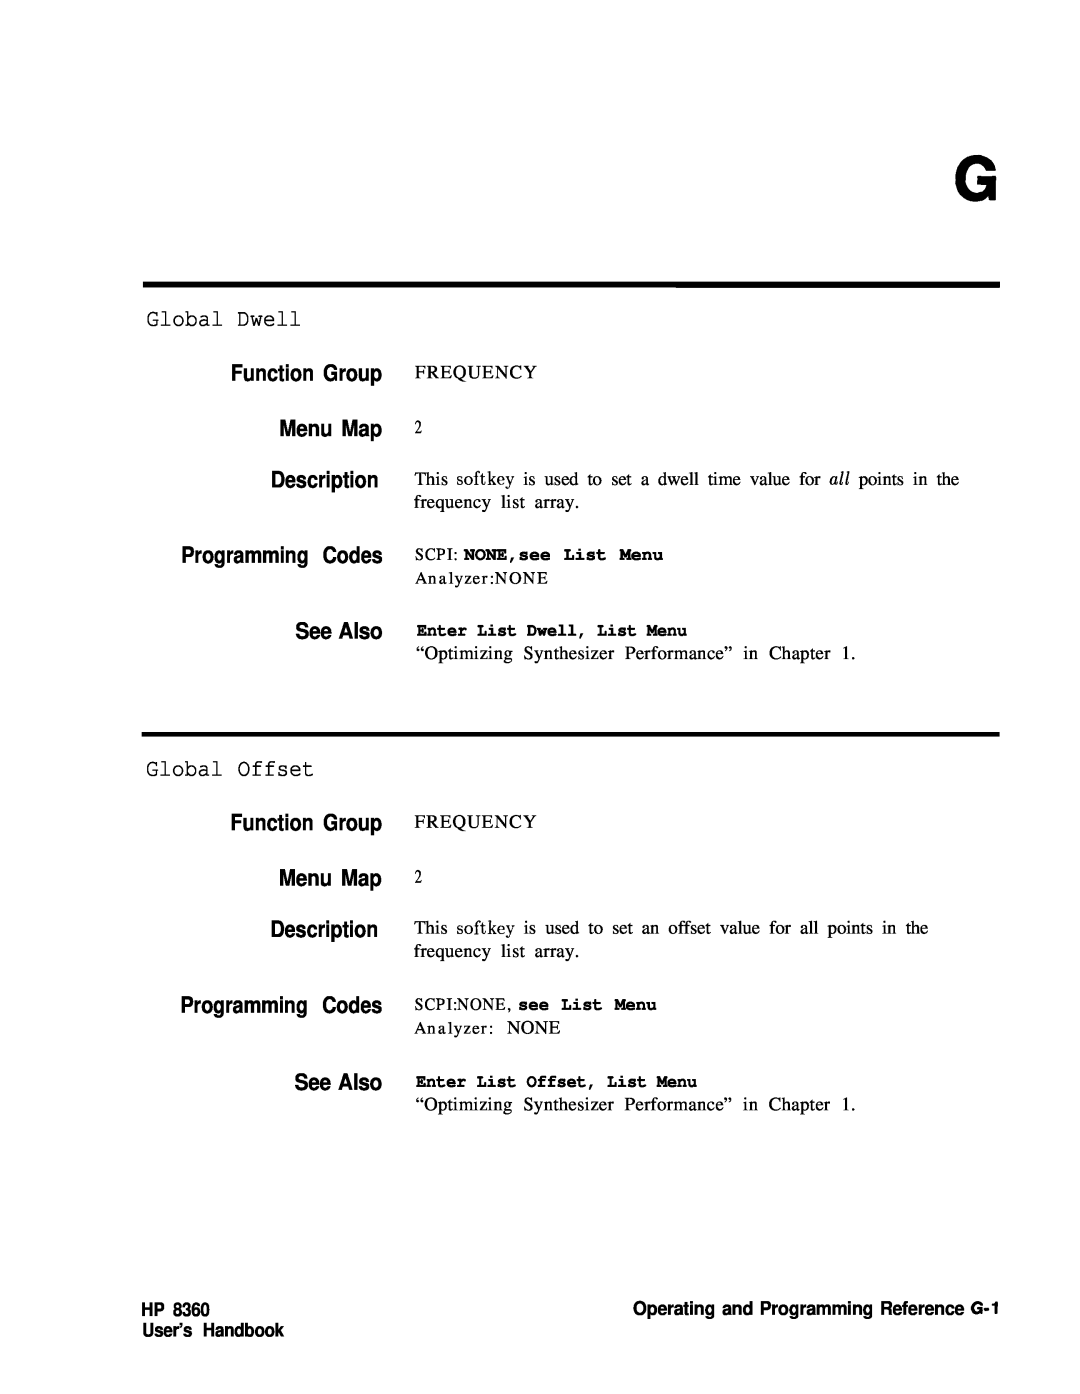 HP 24A, 22A Global Dwell, Global Offset, Function Group Menu Map Description Programming Codes See Also, User’s Handbook 